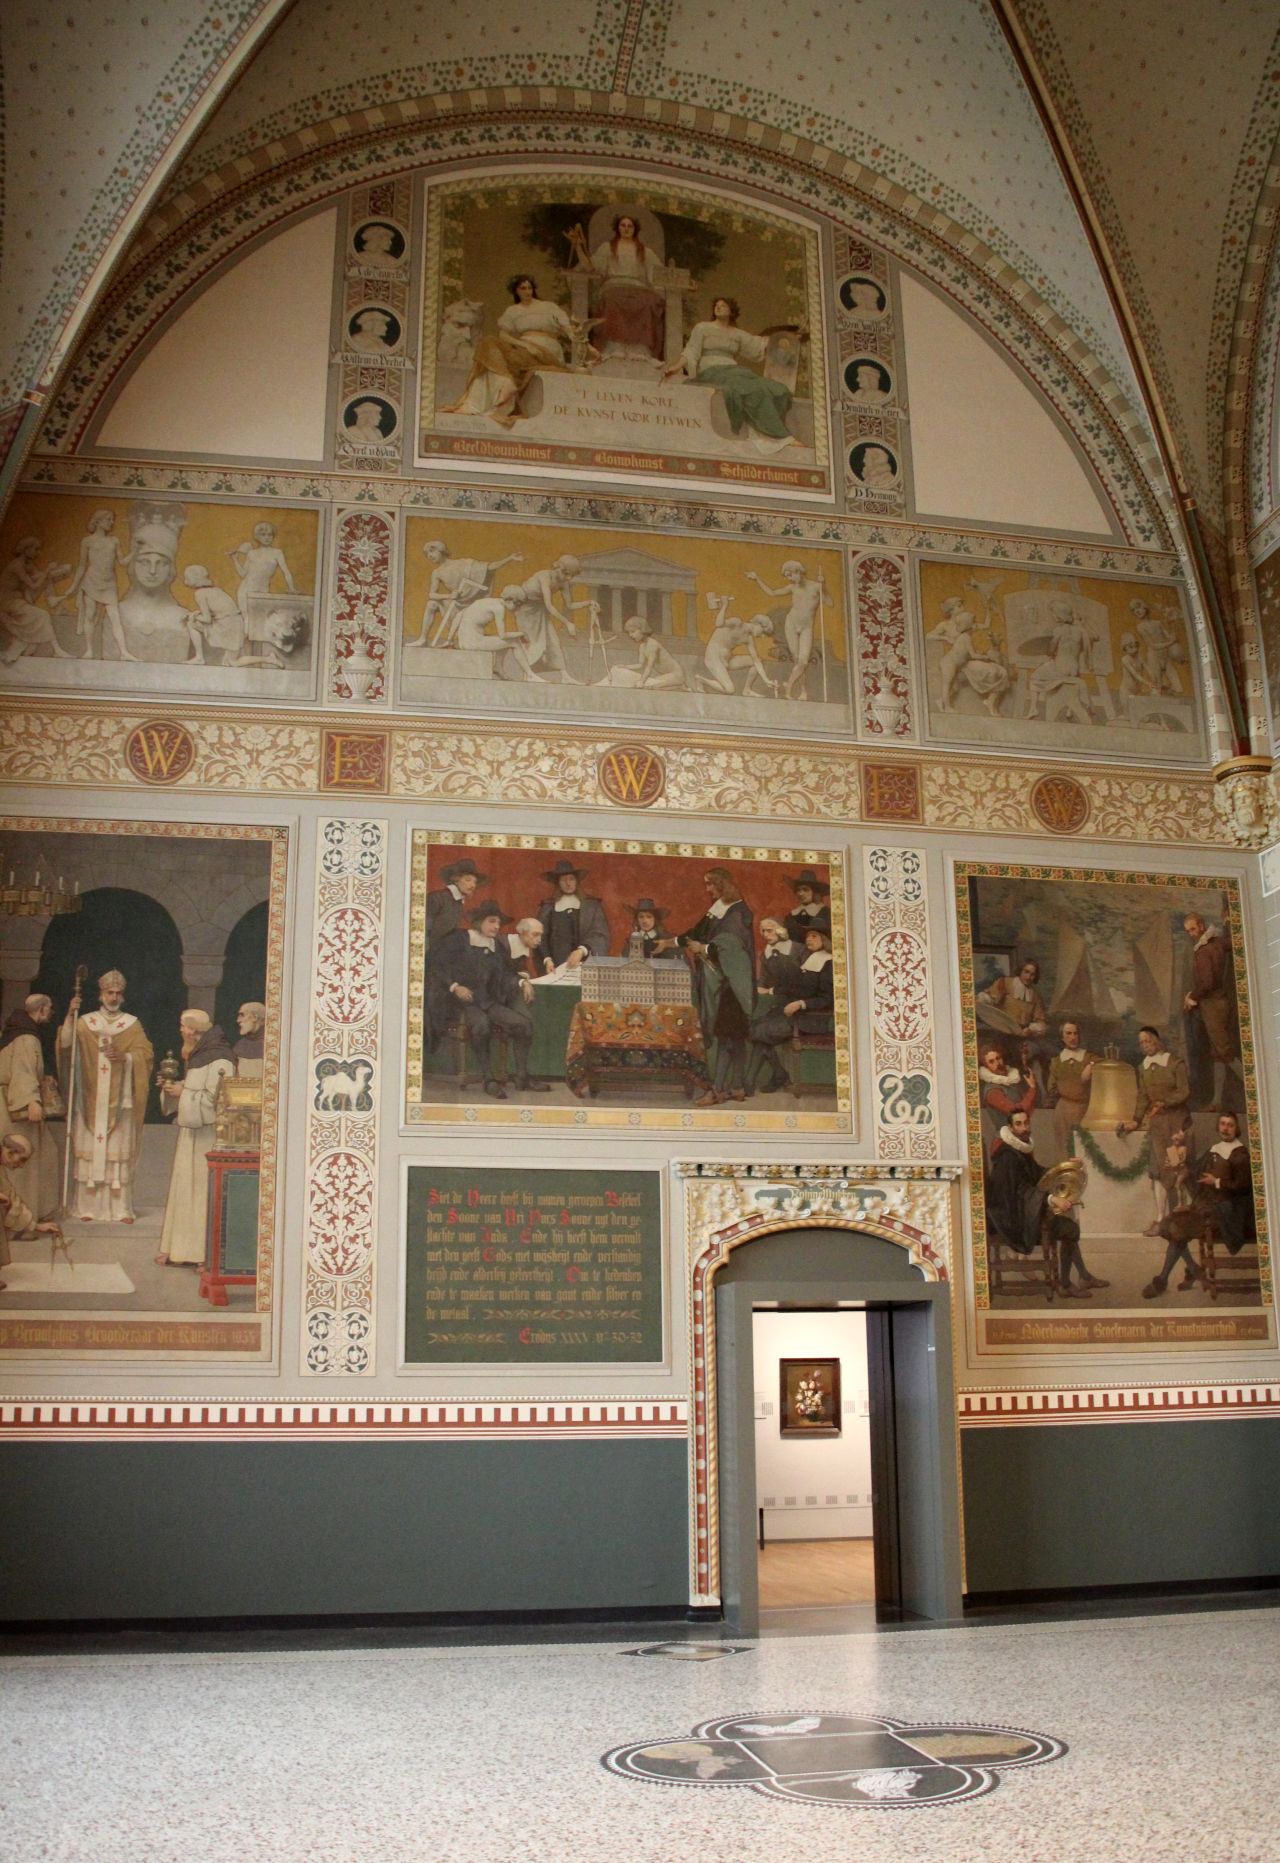 The museum's original entrance hall, designed by architect Pierre Cuypers in 1885, and decorated with opulent wall paintings by Georg Sturm, has been returned to its former glory.